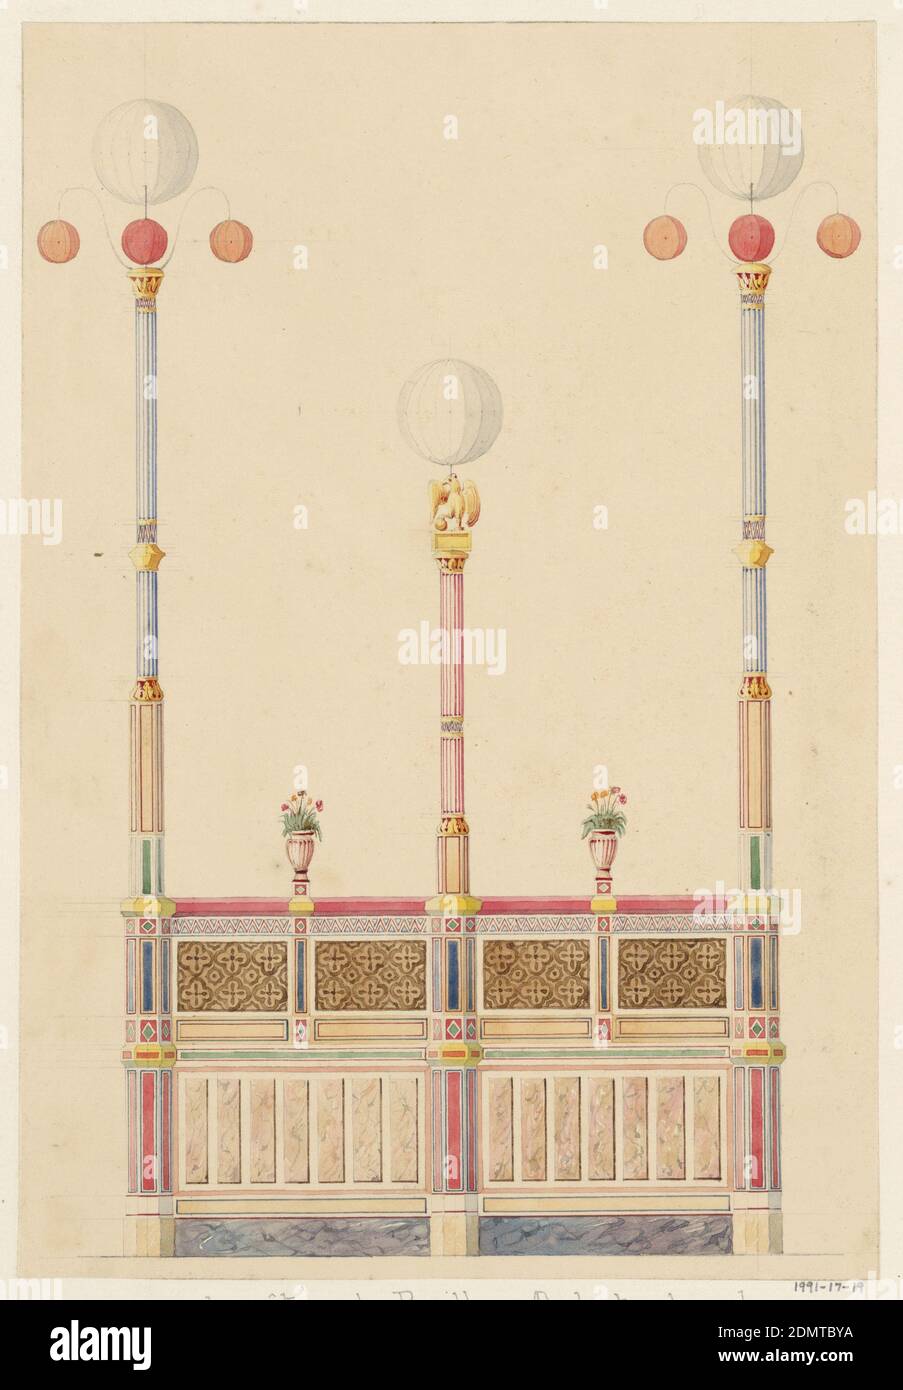 Un des cotes du Pavillon orchestre dans le Jardin des Tuileries, en Juillet 1838', Félix-Jacques Duban, French, 1798 - 1870, Brush & pen & watercolor, graphite Support: light tan paper mounted on off-white laid paper, Design for the low side wall of a music pavilion, which supports three tall light posts. The two matching end light posts are decorated with blue and white stripes and gold accents. The top of each post terminates in a large white globe lantern, with three smaller globe lanterns below, two colored orange and the third red. The shorter central lamp post is articulated with red Stock Photo